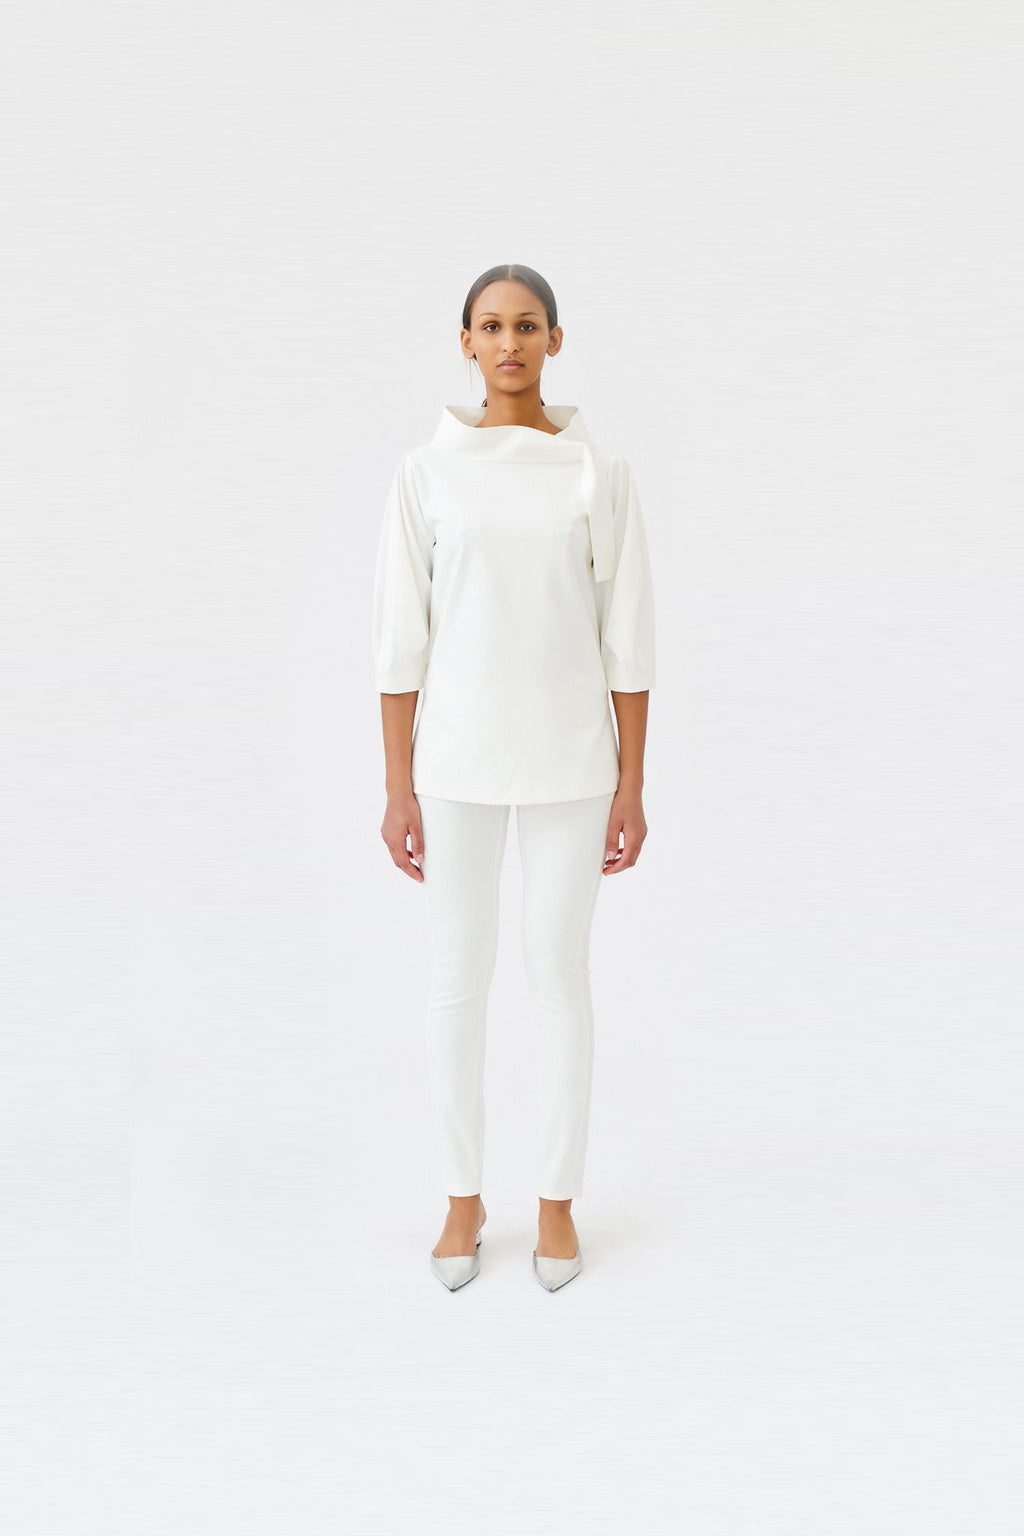 wingate collection teno white top on female model with silver slippers video